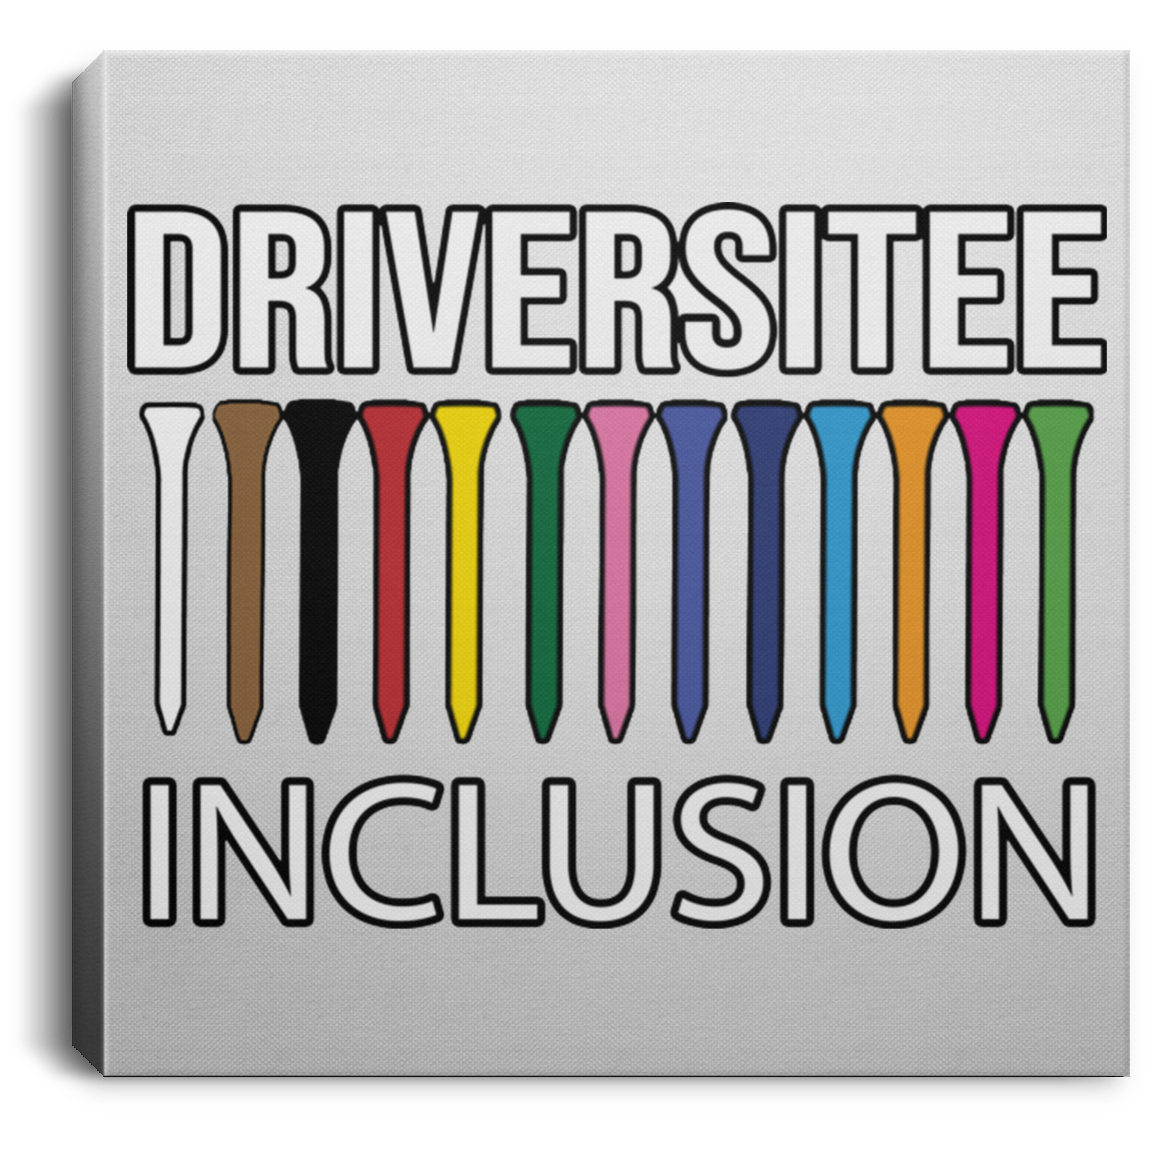 OPG Custom Design #5. Driversitee and Inclusion. Golf. Square Canvas .75in Frame